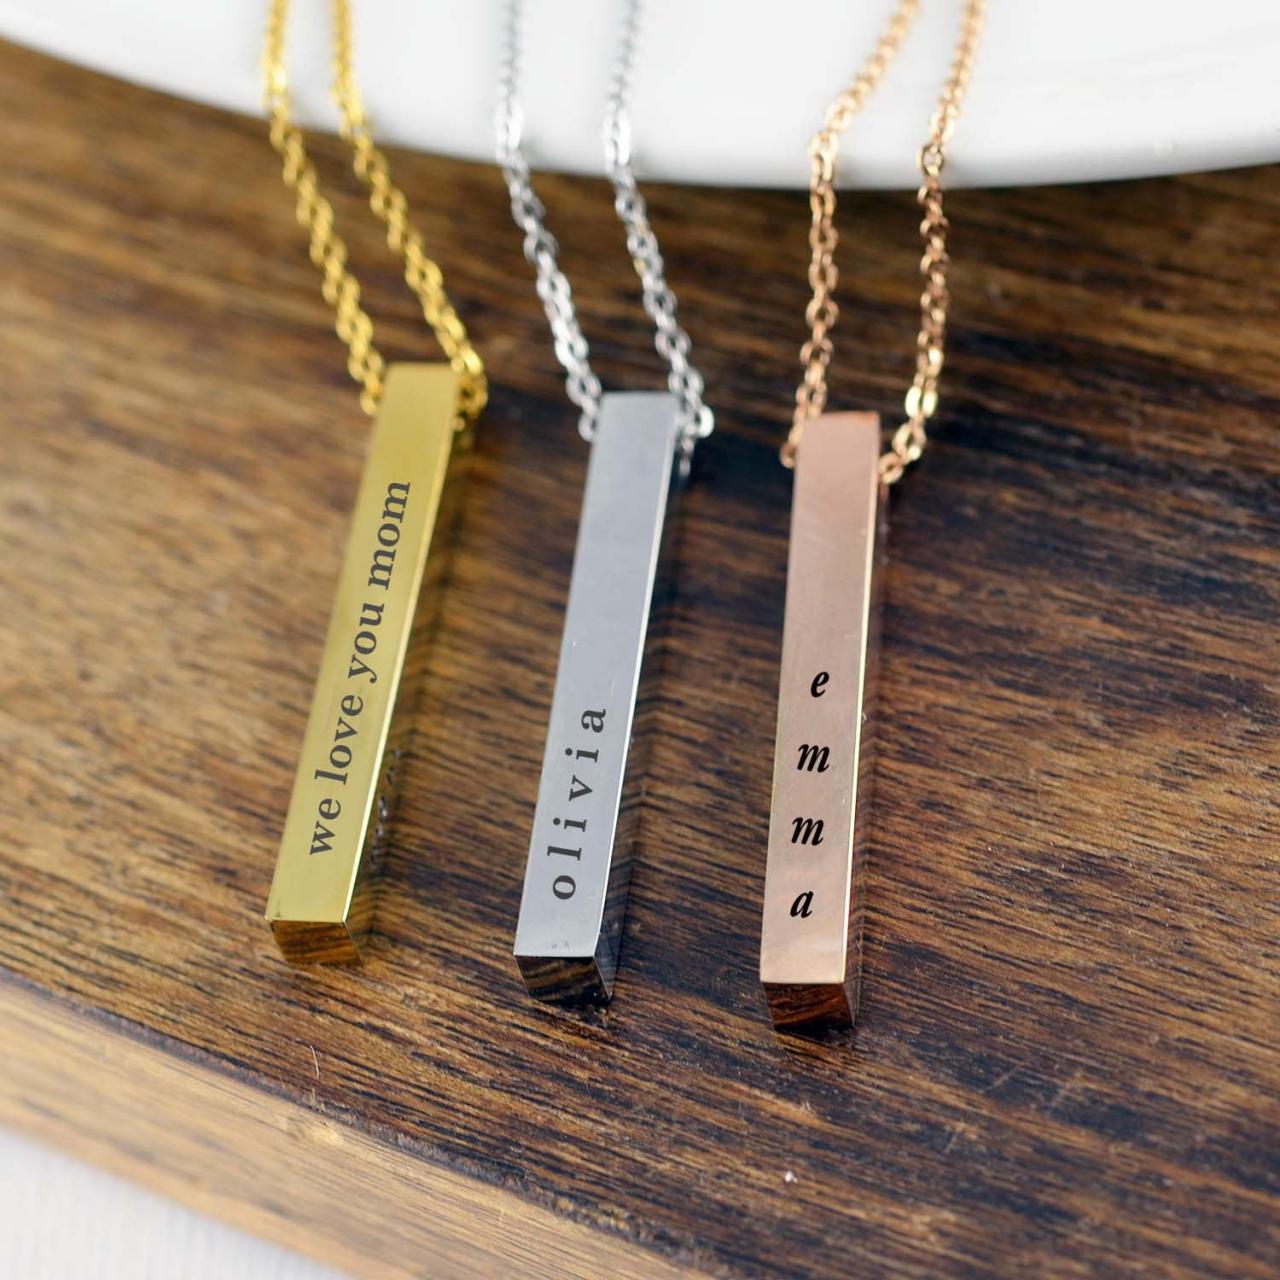 Bar Necklace, 4 Sided Bar Necklace, Personalized Bar Necklace, Mothers Necklace, Engraved Necklace, Gift For Mother, Mothers Day Jewelry